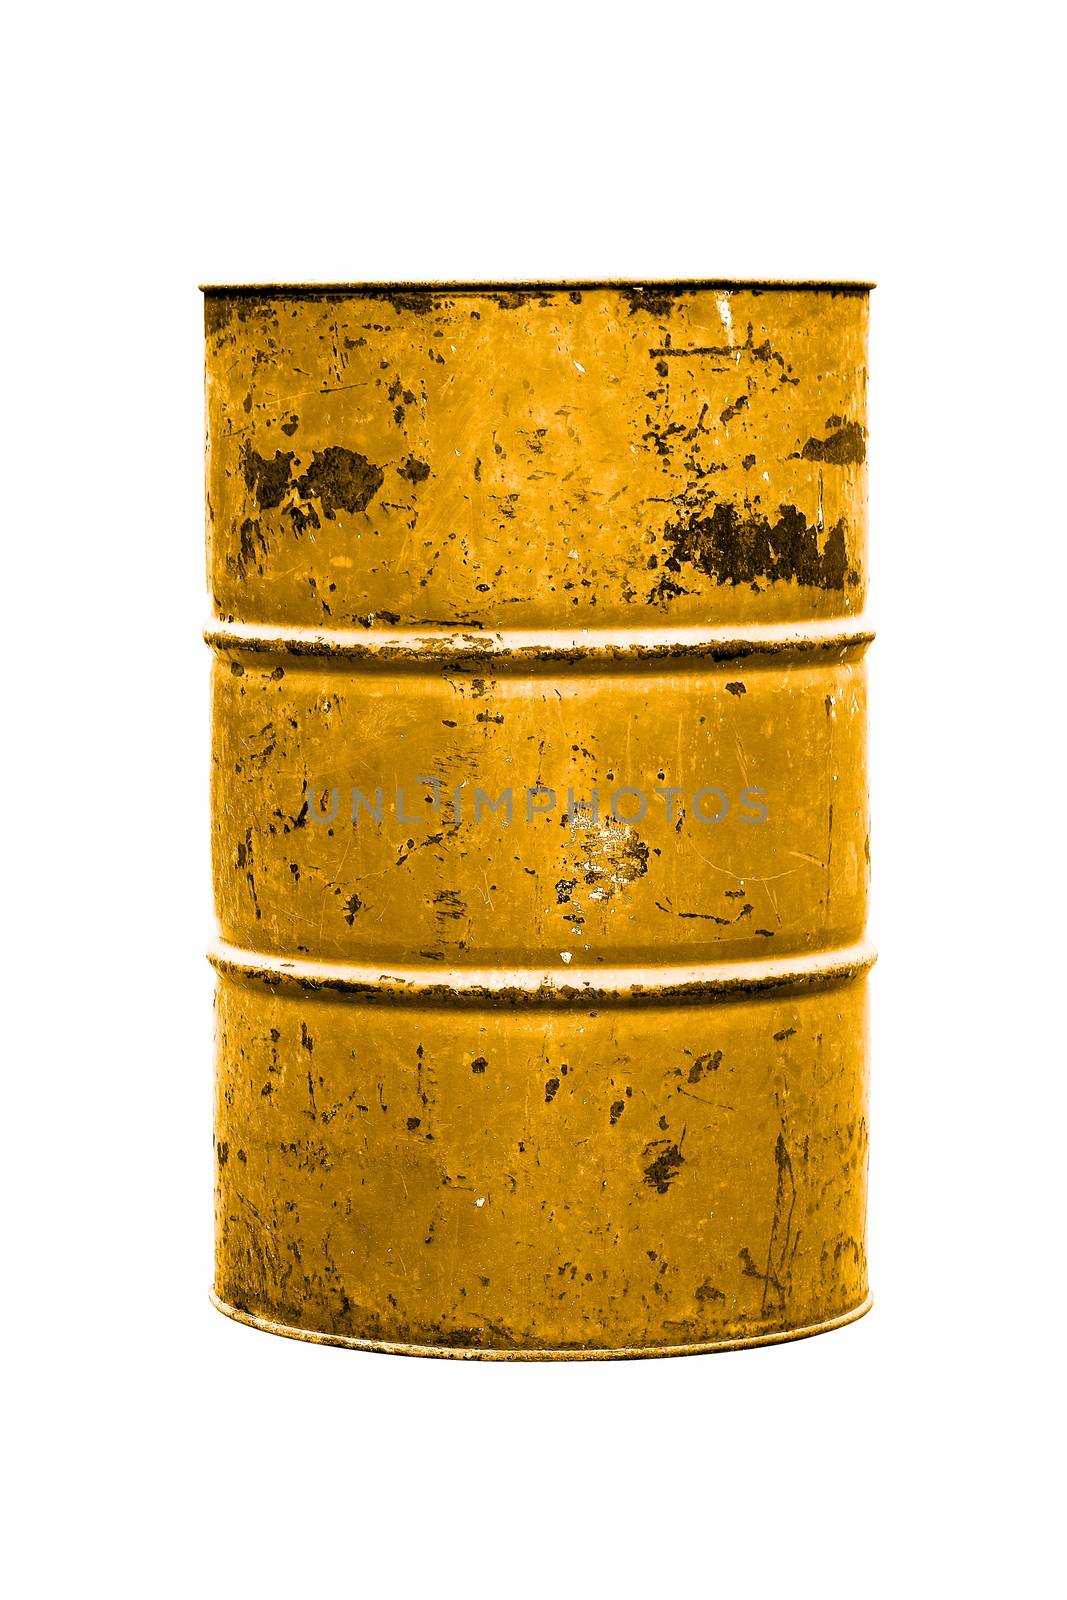 Barrel Oil yellow or gold Old isolated on background white by cgdeaw